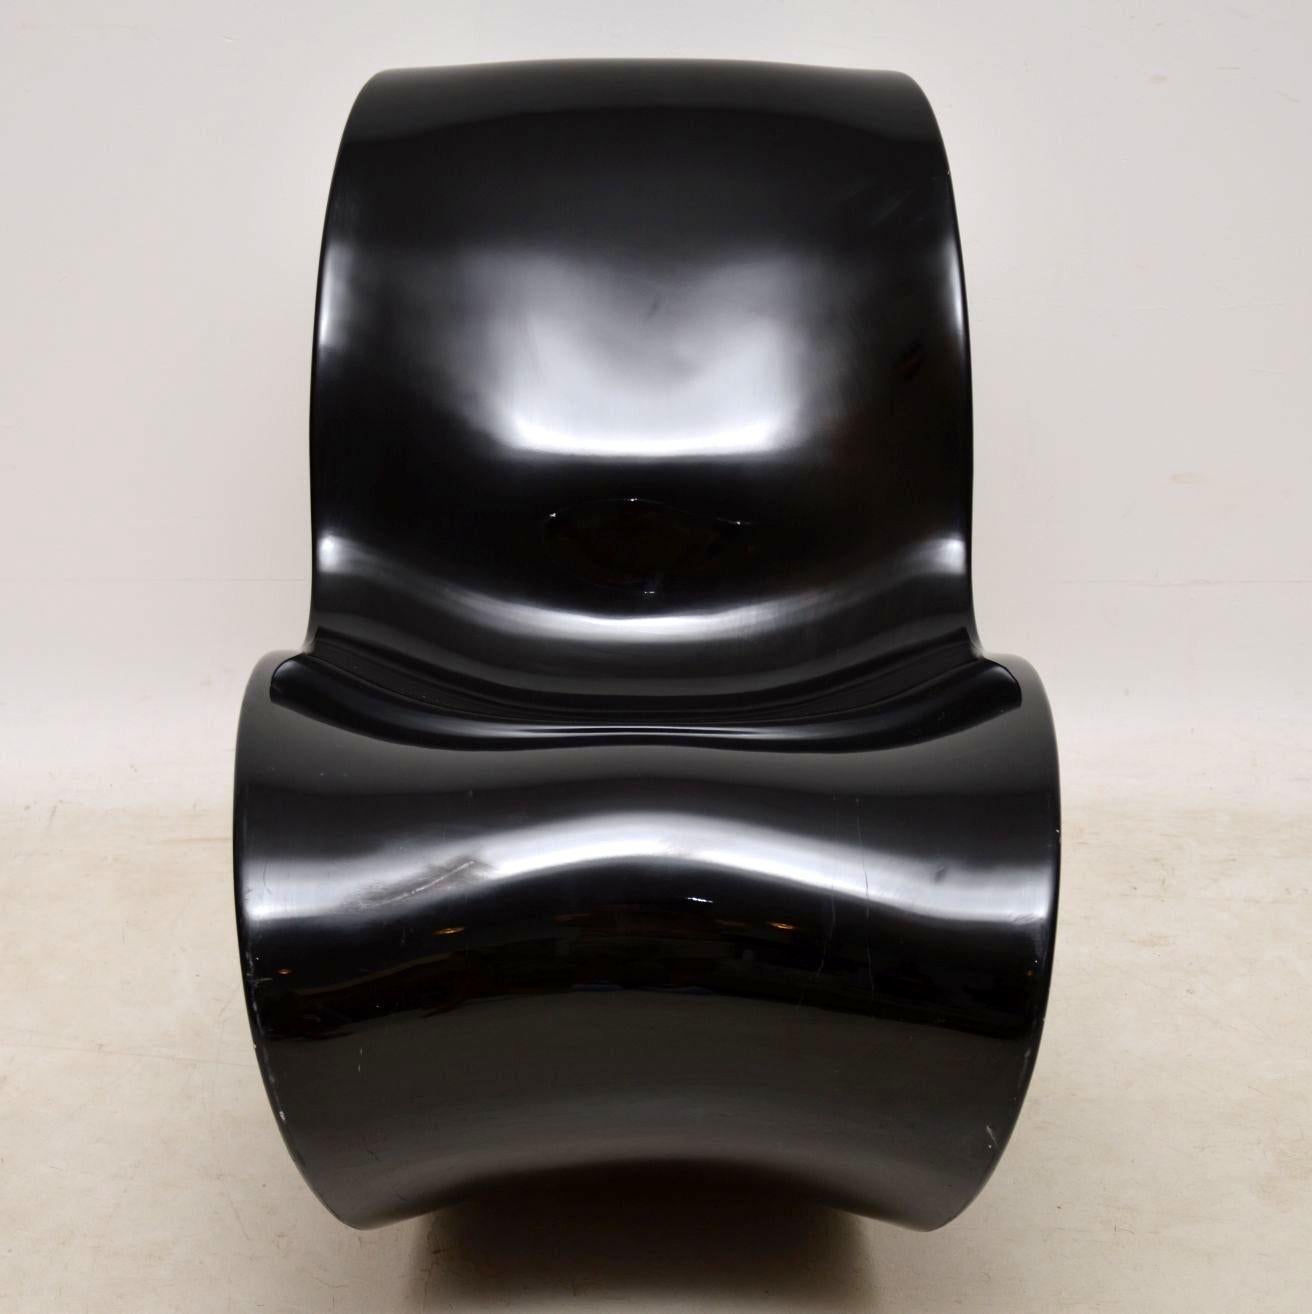 Stunning and Iconic Design, This Is the ‘Voido’ Rocking Chair in a Black Glos 1